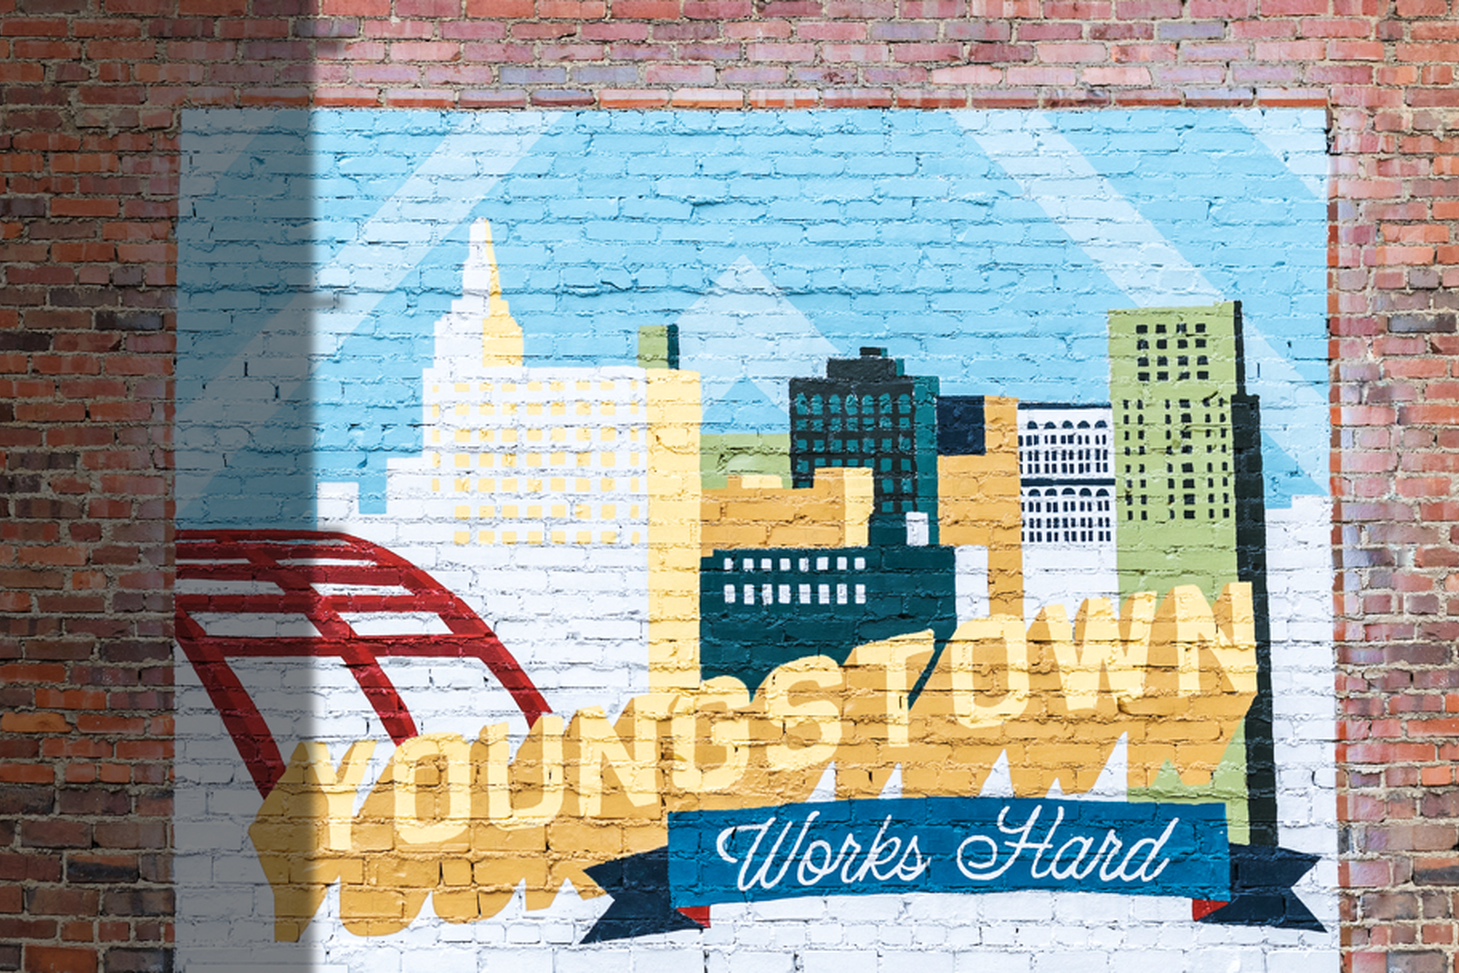 This mural on the Youngstown Business Incubator building was designed by local artist Salsi Salama and painted by Youngstown State University students.